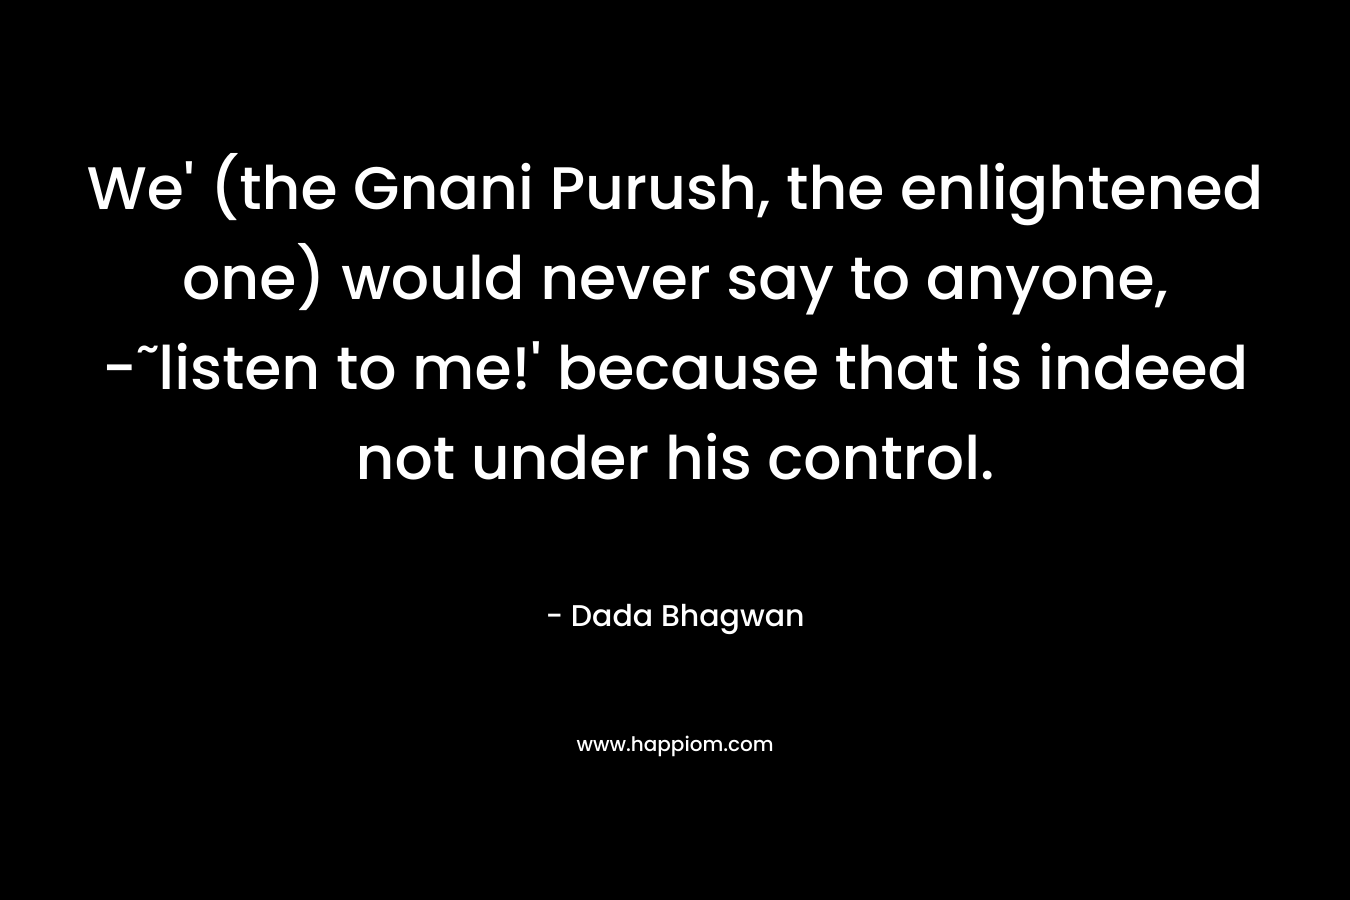 We' (the Gnani Purush, the enlightened one) would never say to anyone, -˜listen to me!' because that is indeed not under his control.